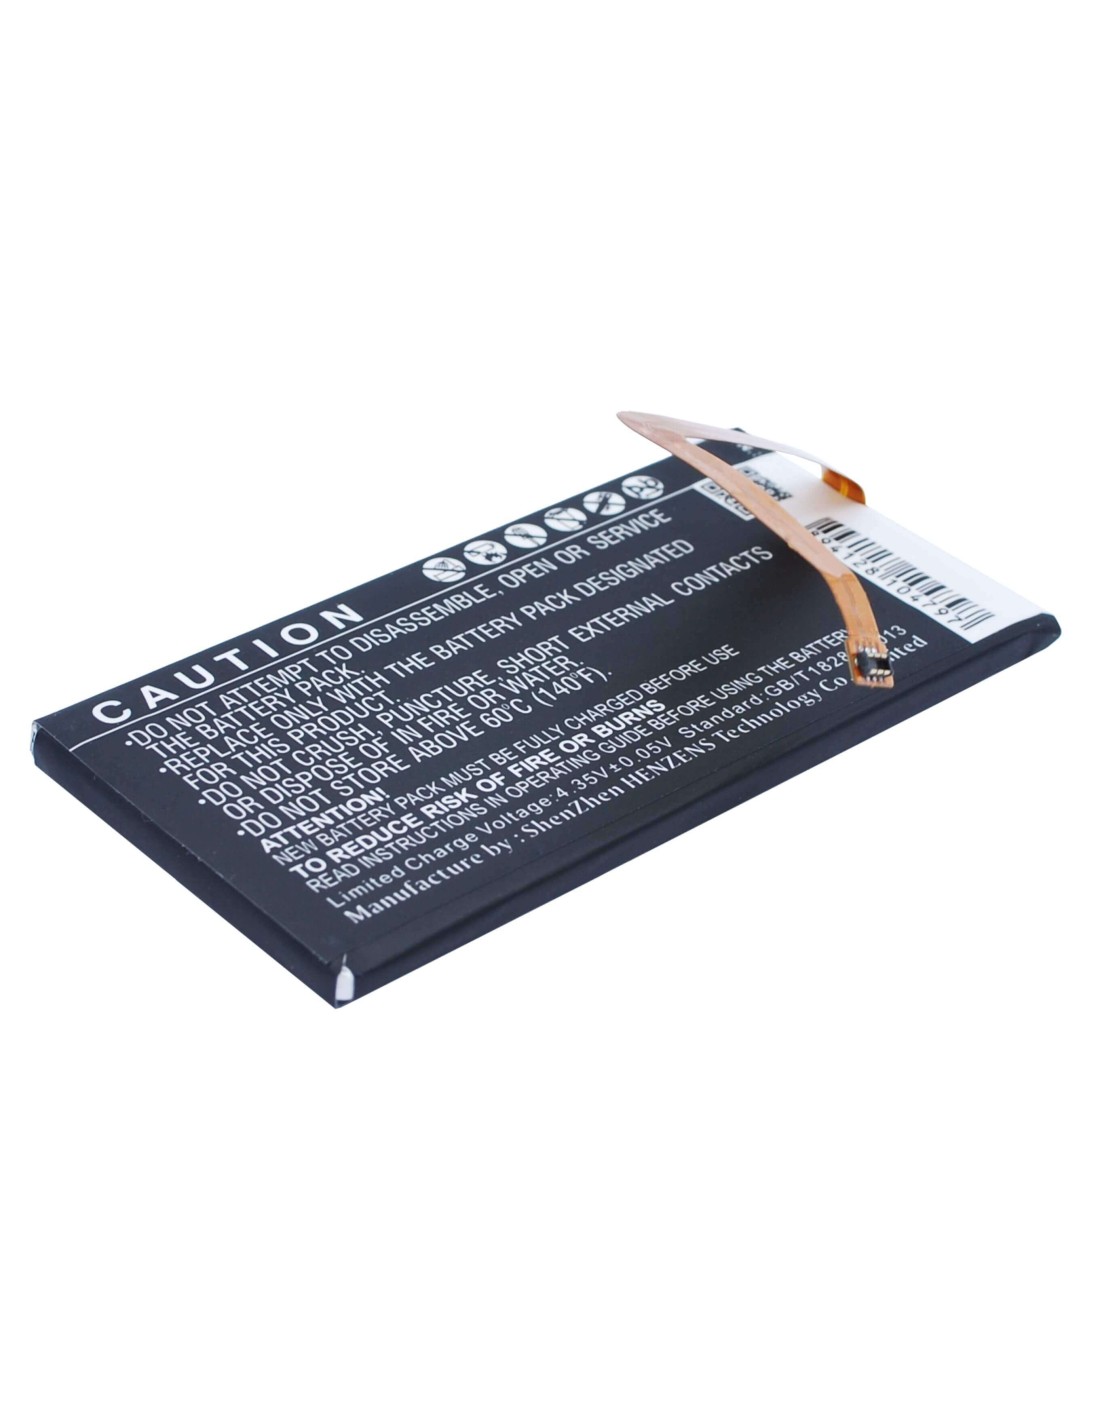 Battery for Huawei Ascend G628, Honor 7, Ascend G628-TL00 3.8V, 3050mAh - 11.59Wh